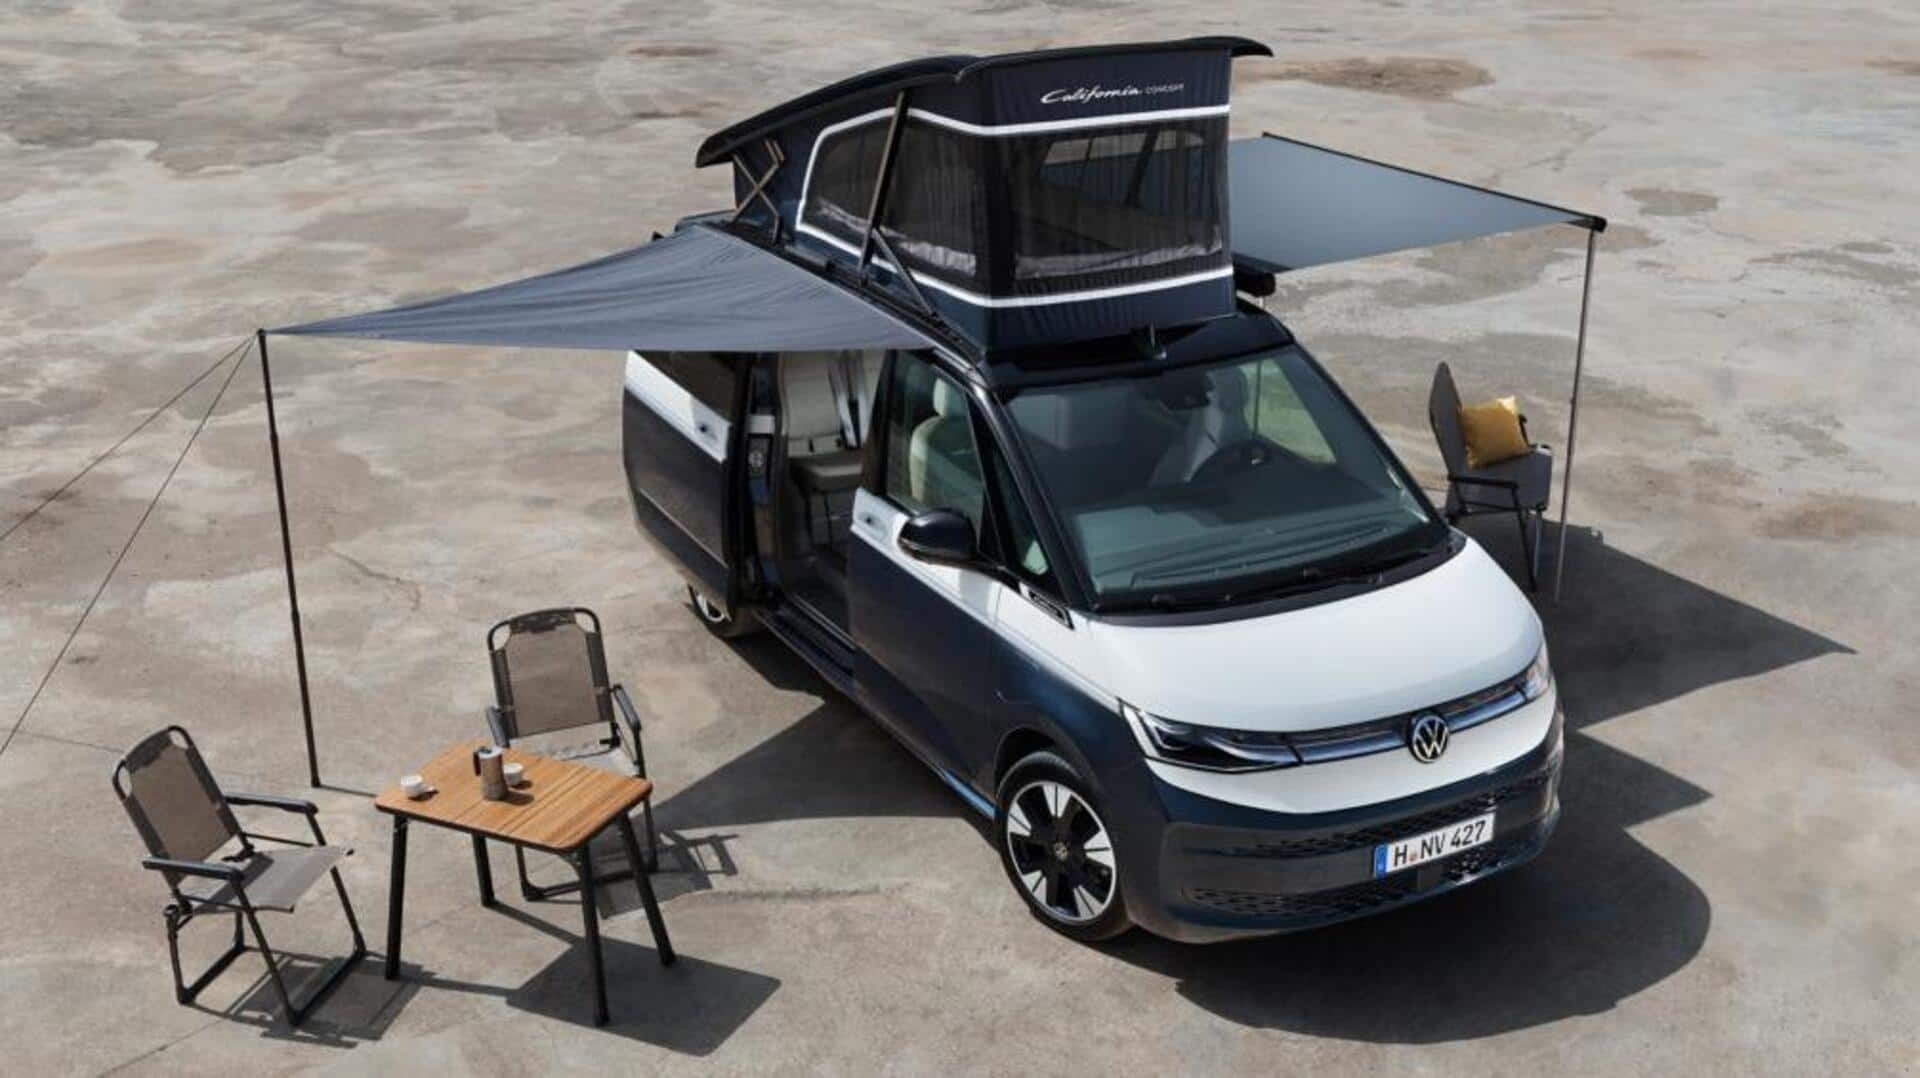 Volkswagen's T7 California concept is a house on four wheels